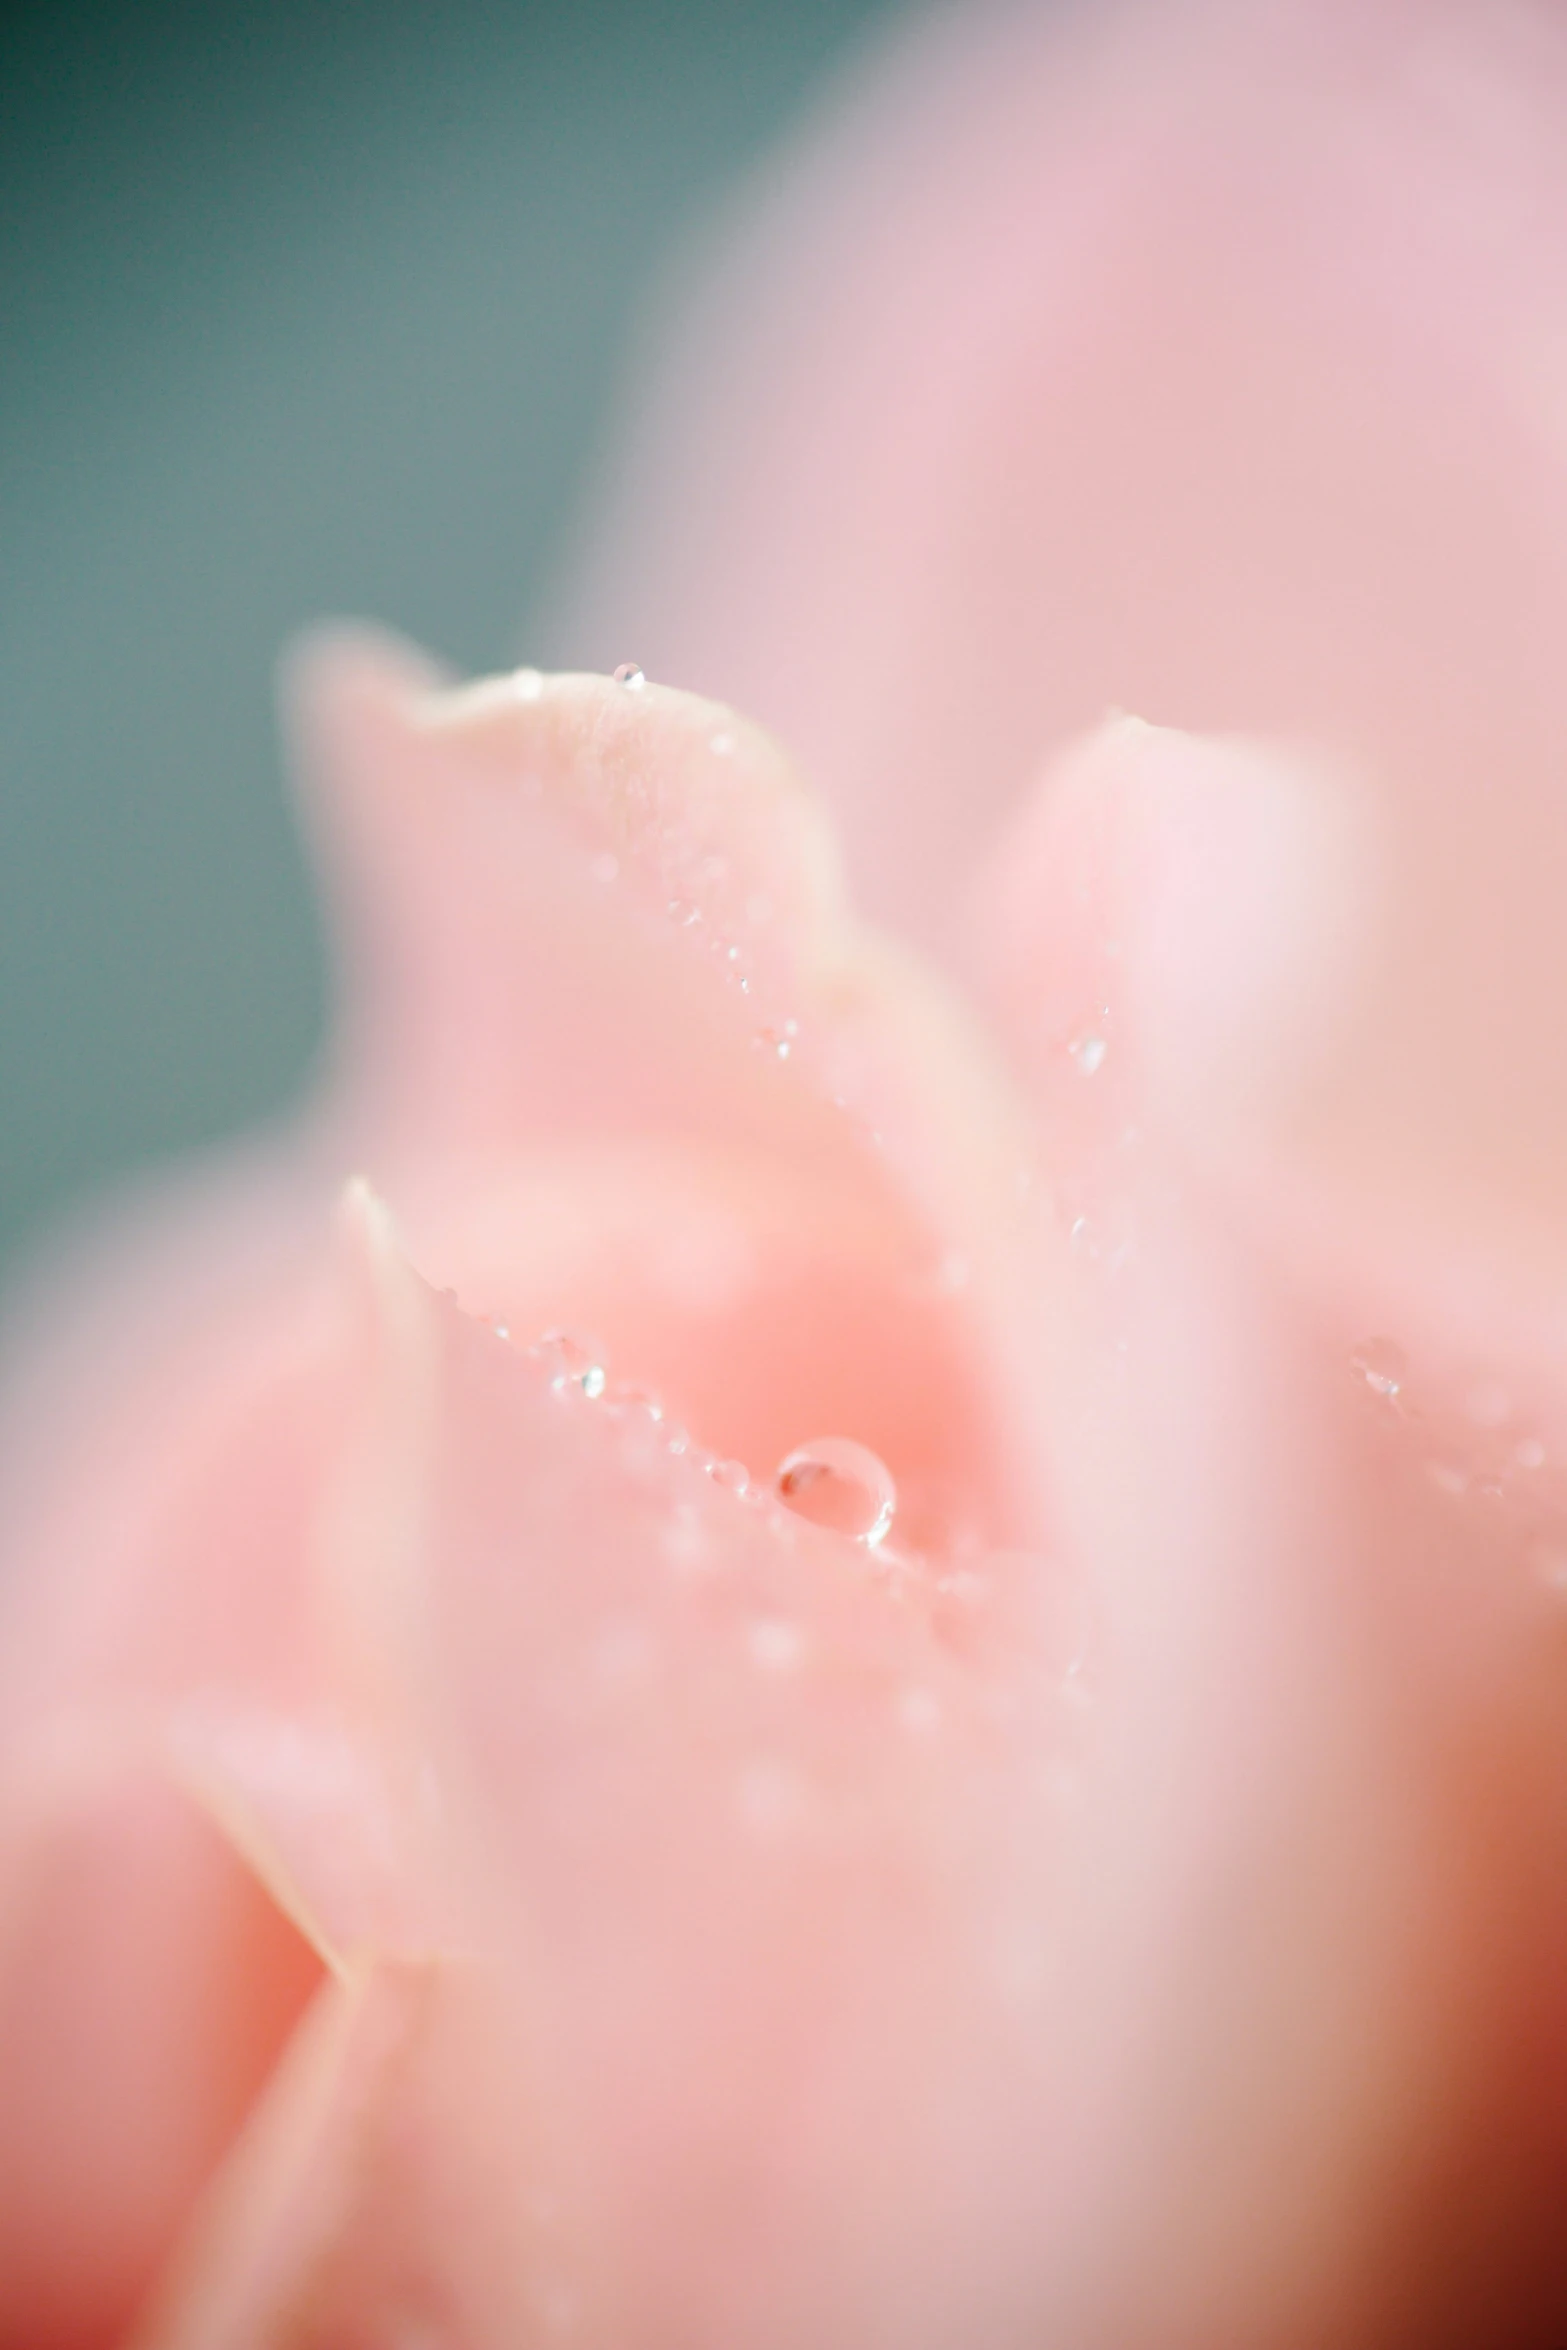 a close up image of the inside of a flower